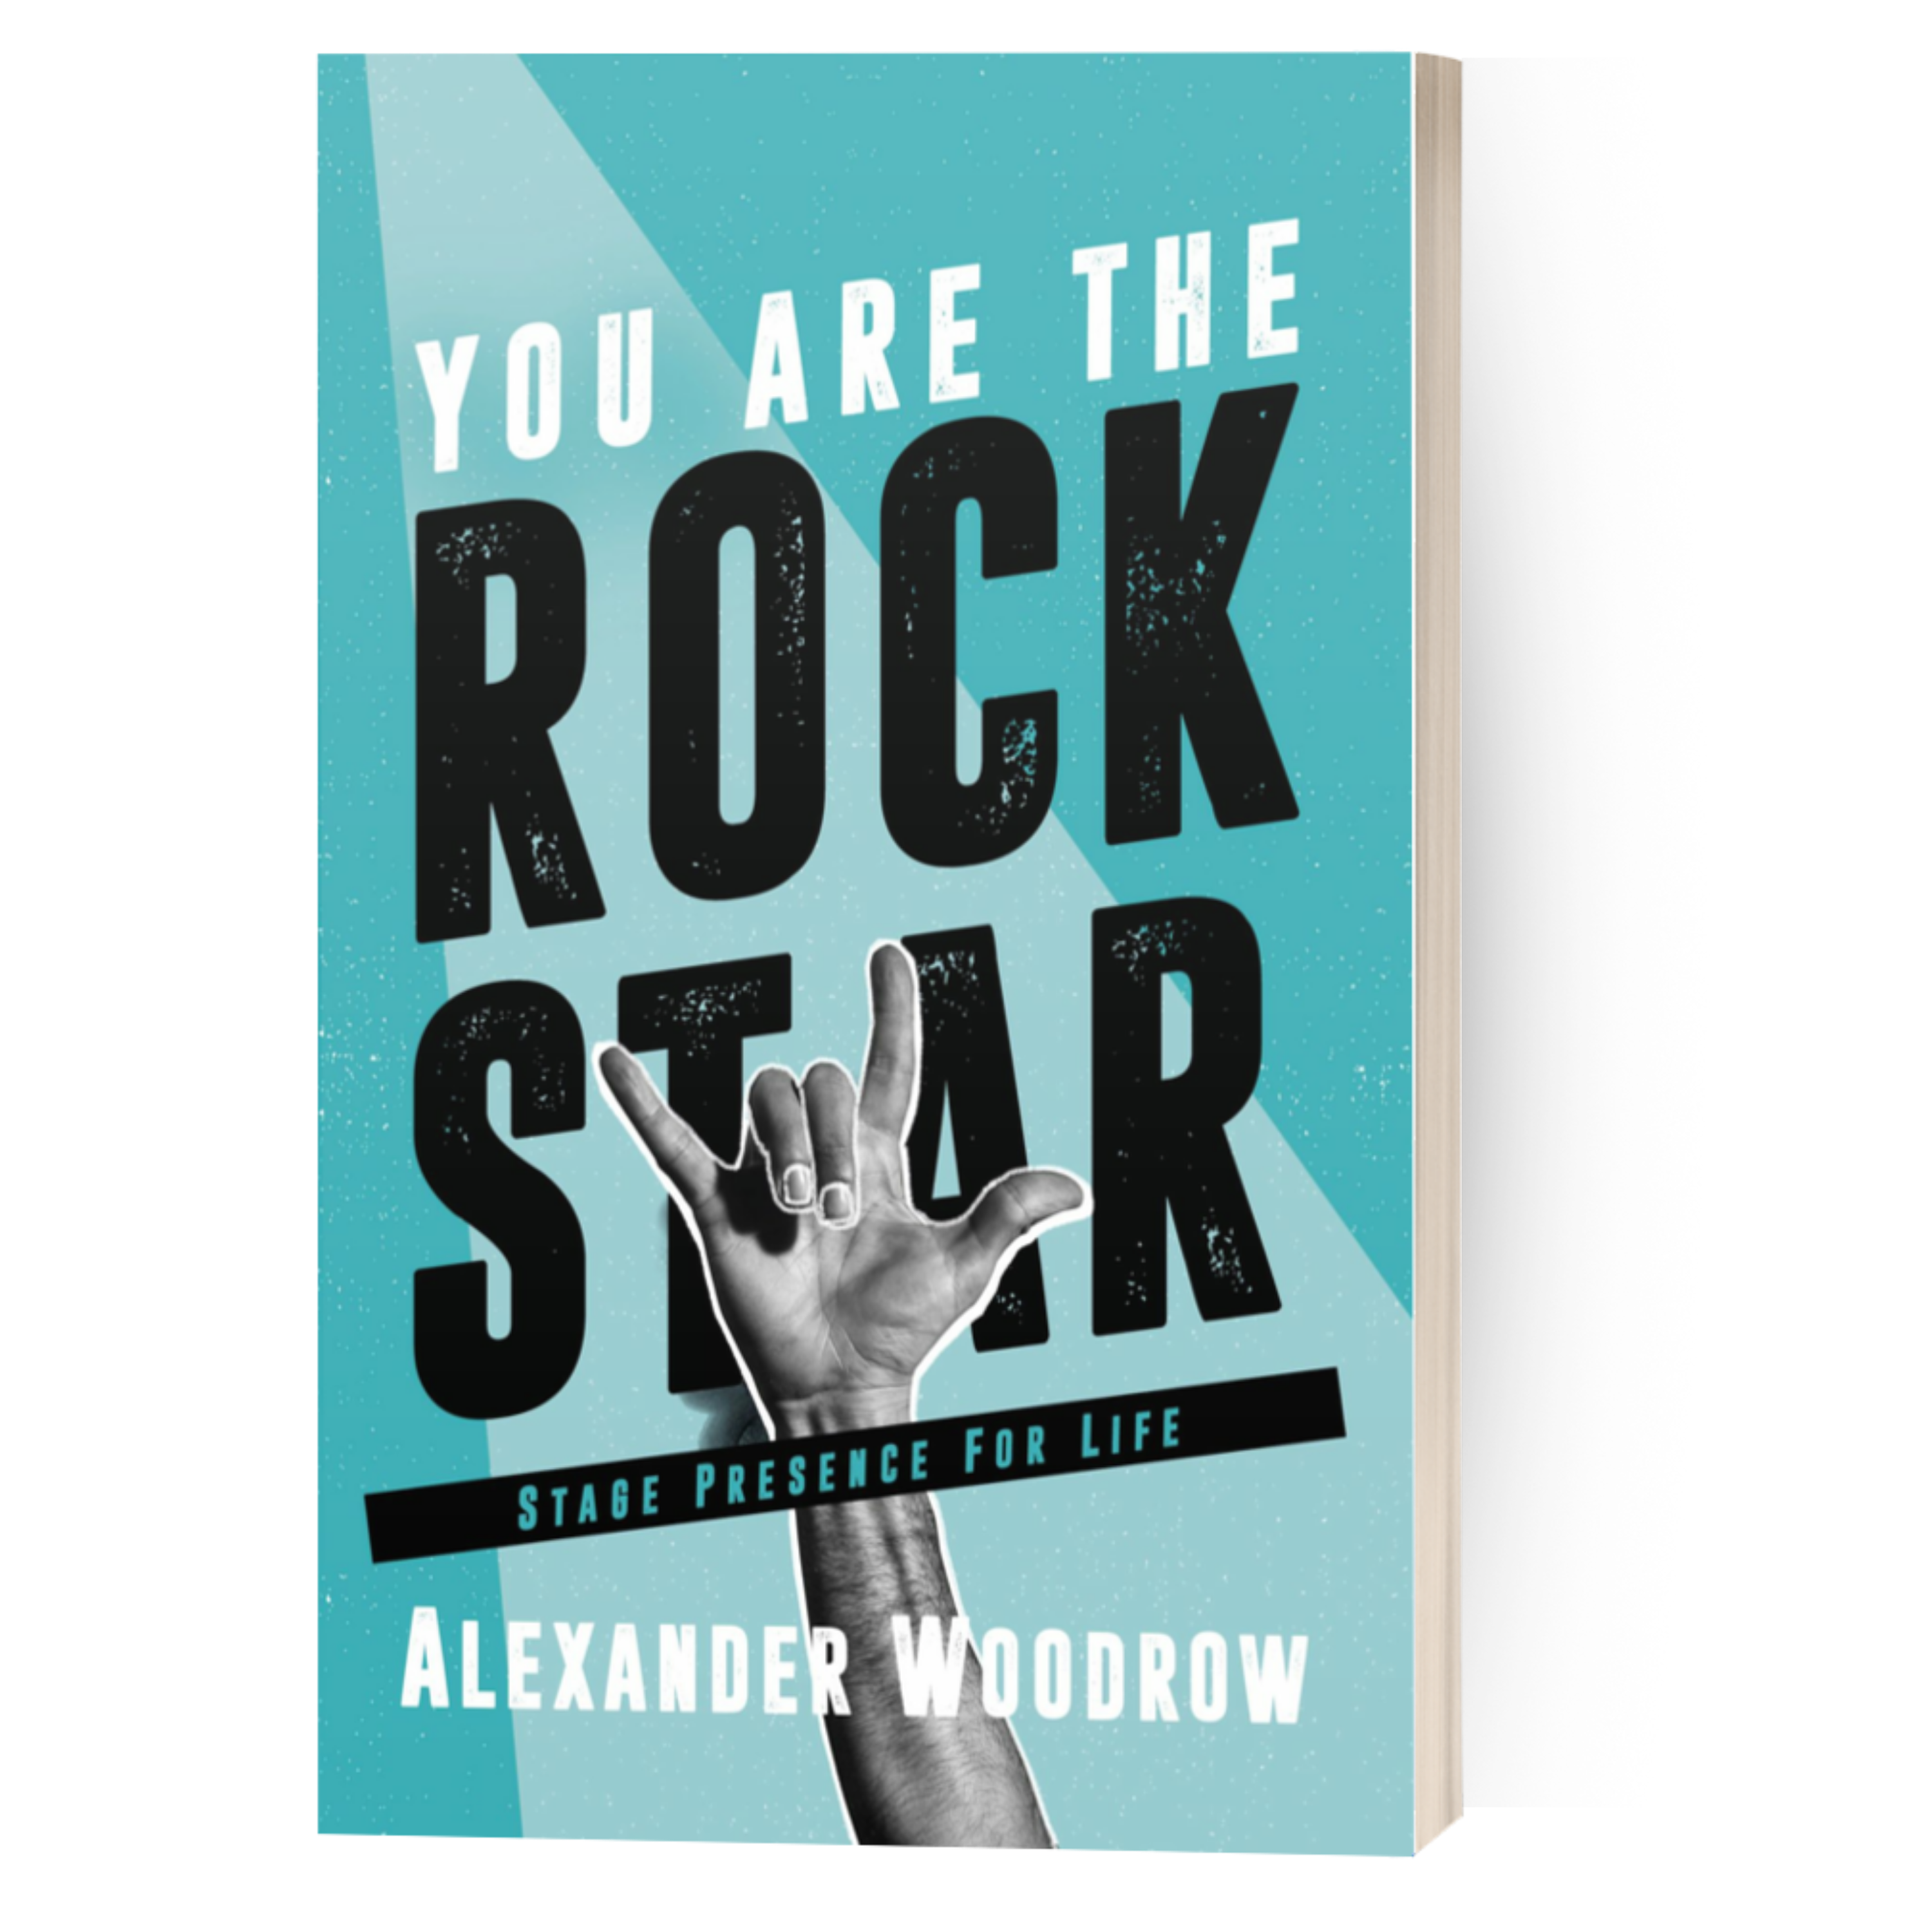 You are the rock star